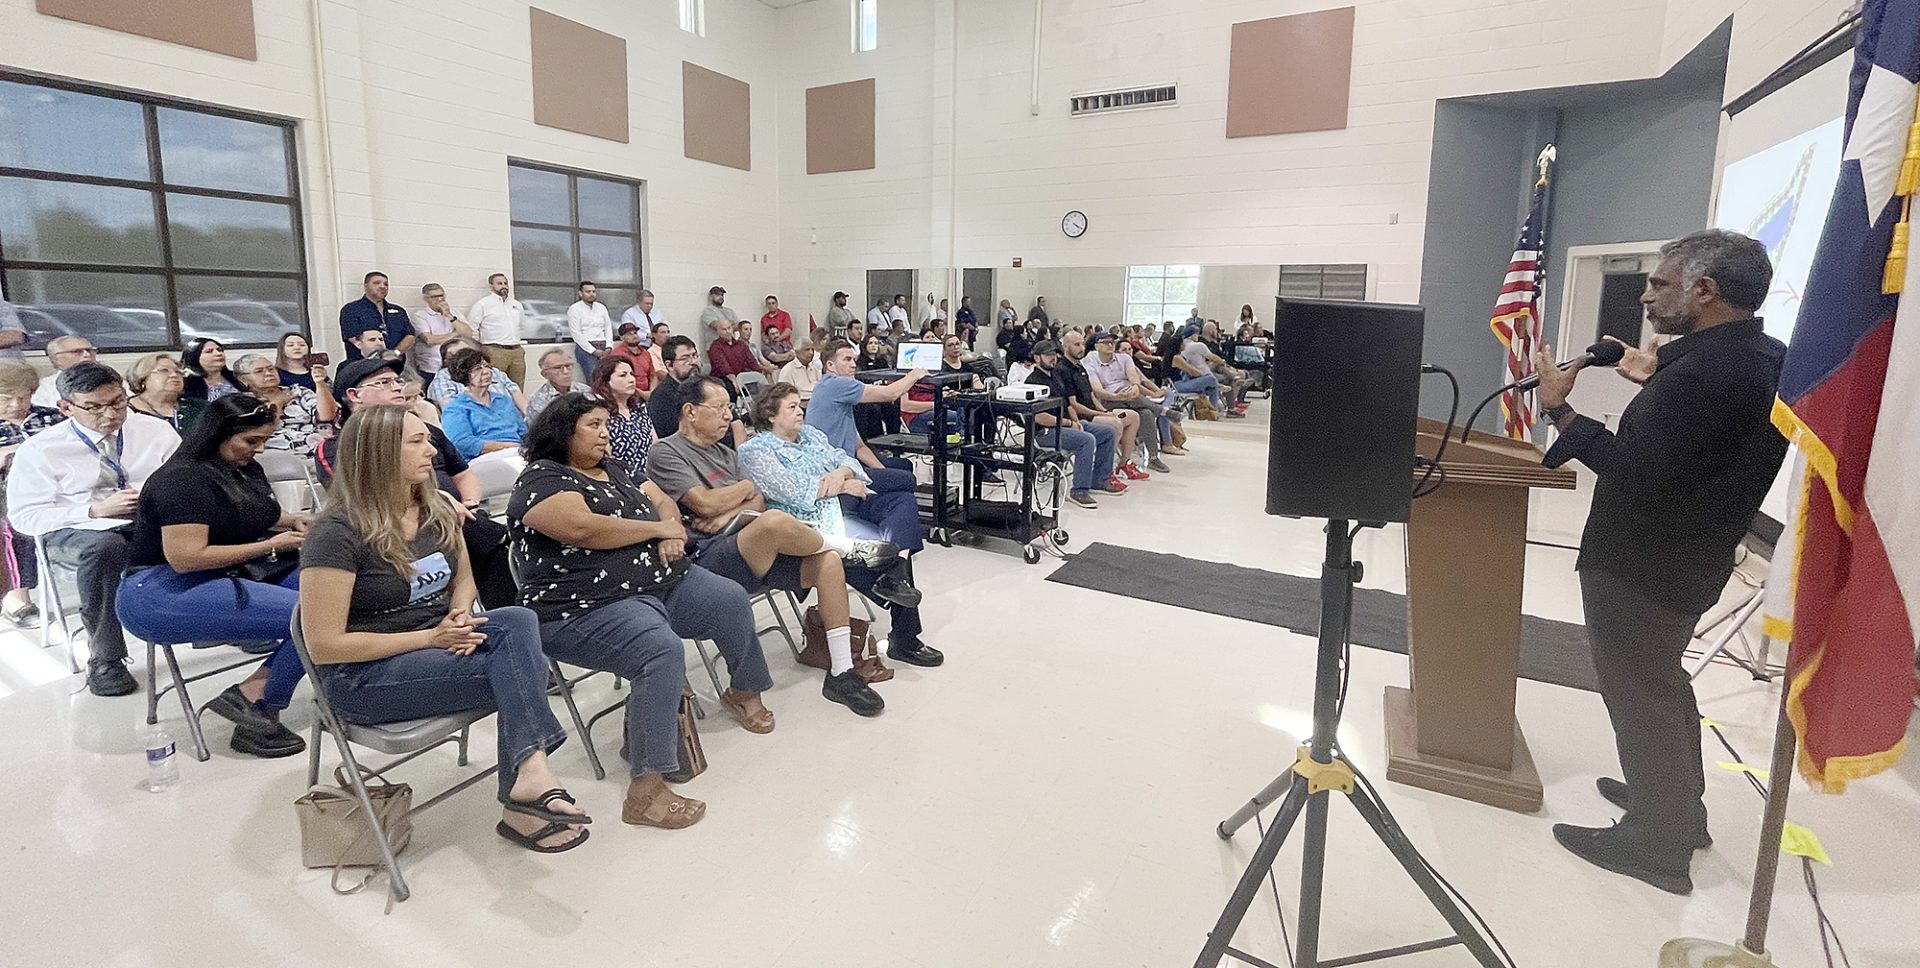 Fate of beloved McAllen park still unclear after contentious town hall